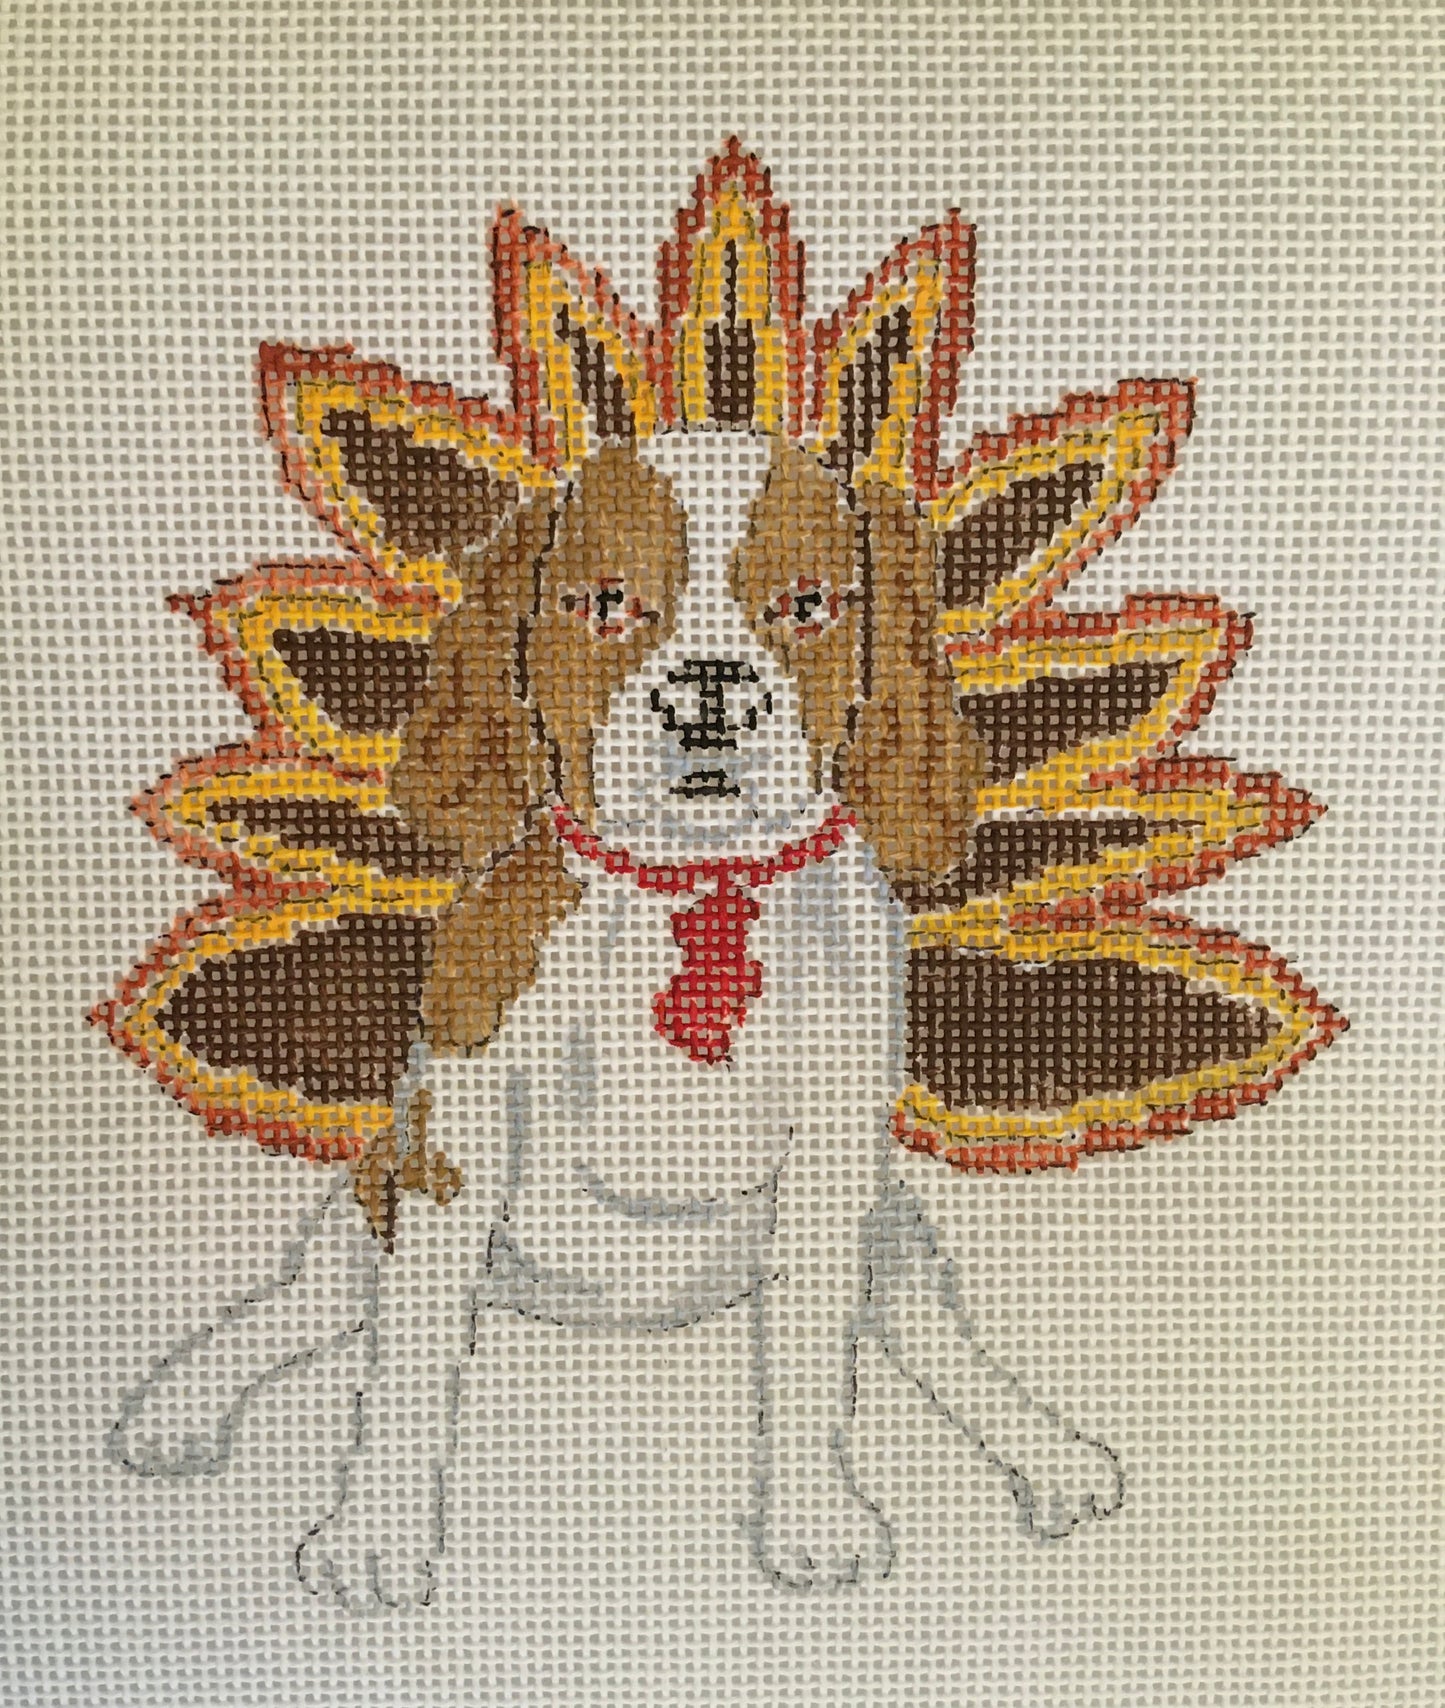 #11 November dog with stitch guide